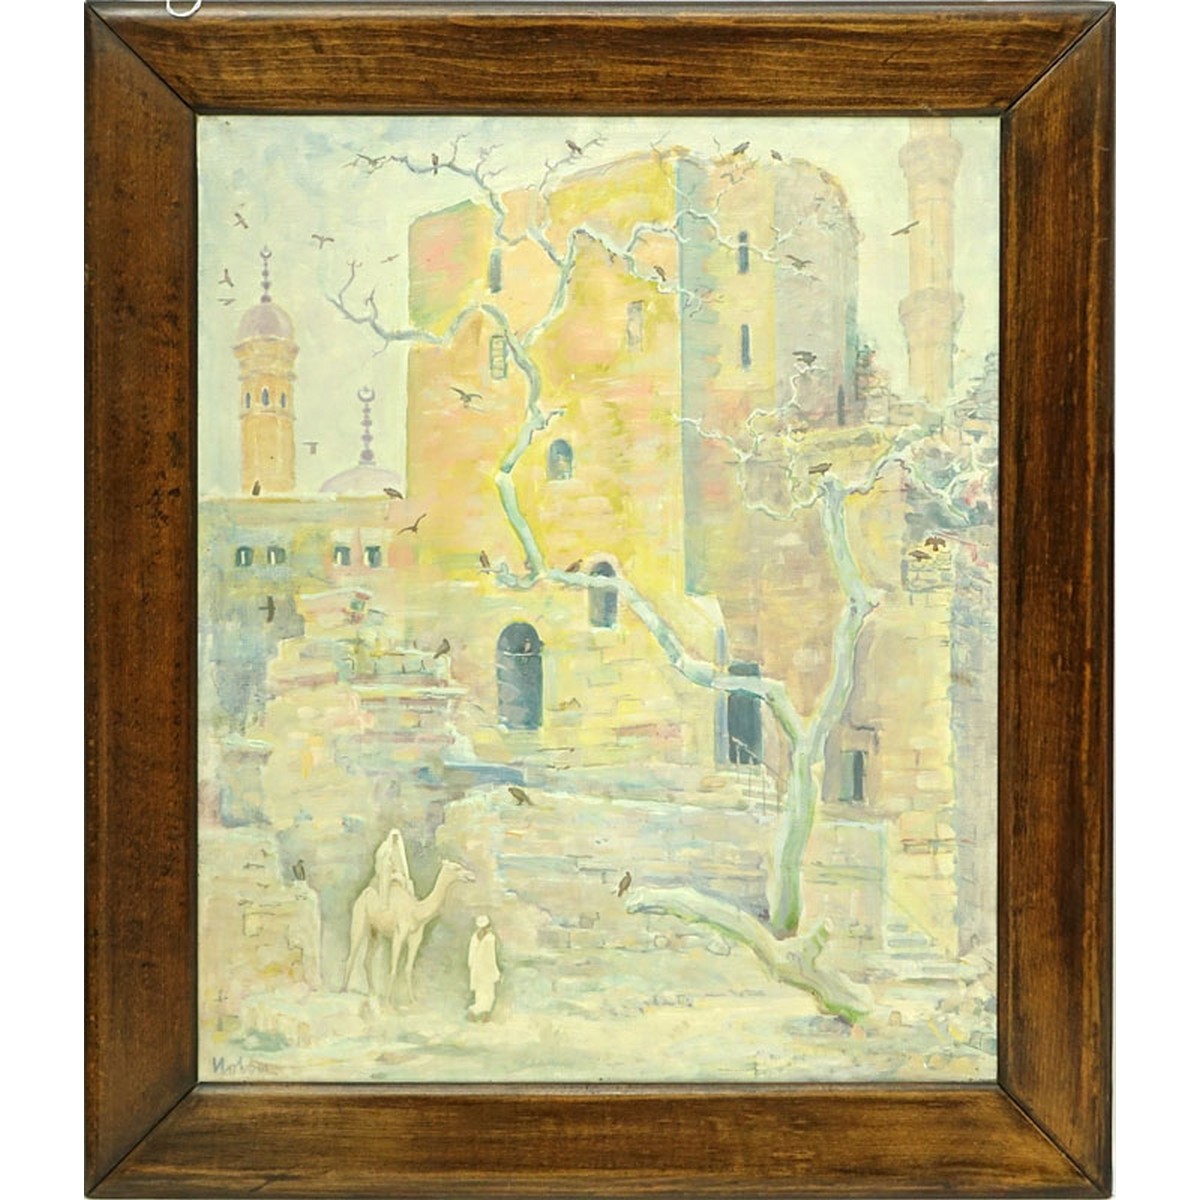 Orientalist Oil On Canvas, Architecture Scene in Cairo, Signed Lower Left. Inscribed on frame en verso.